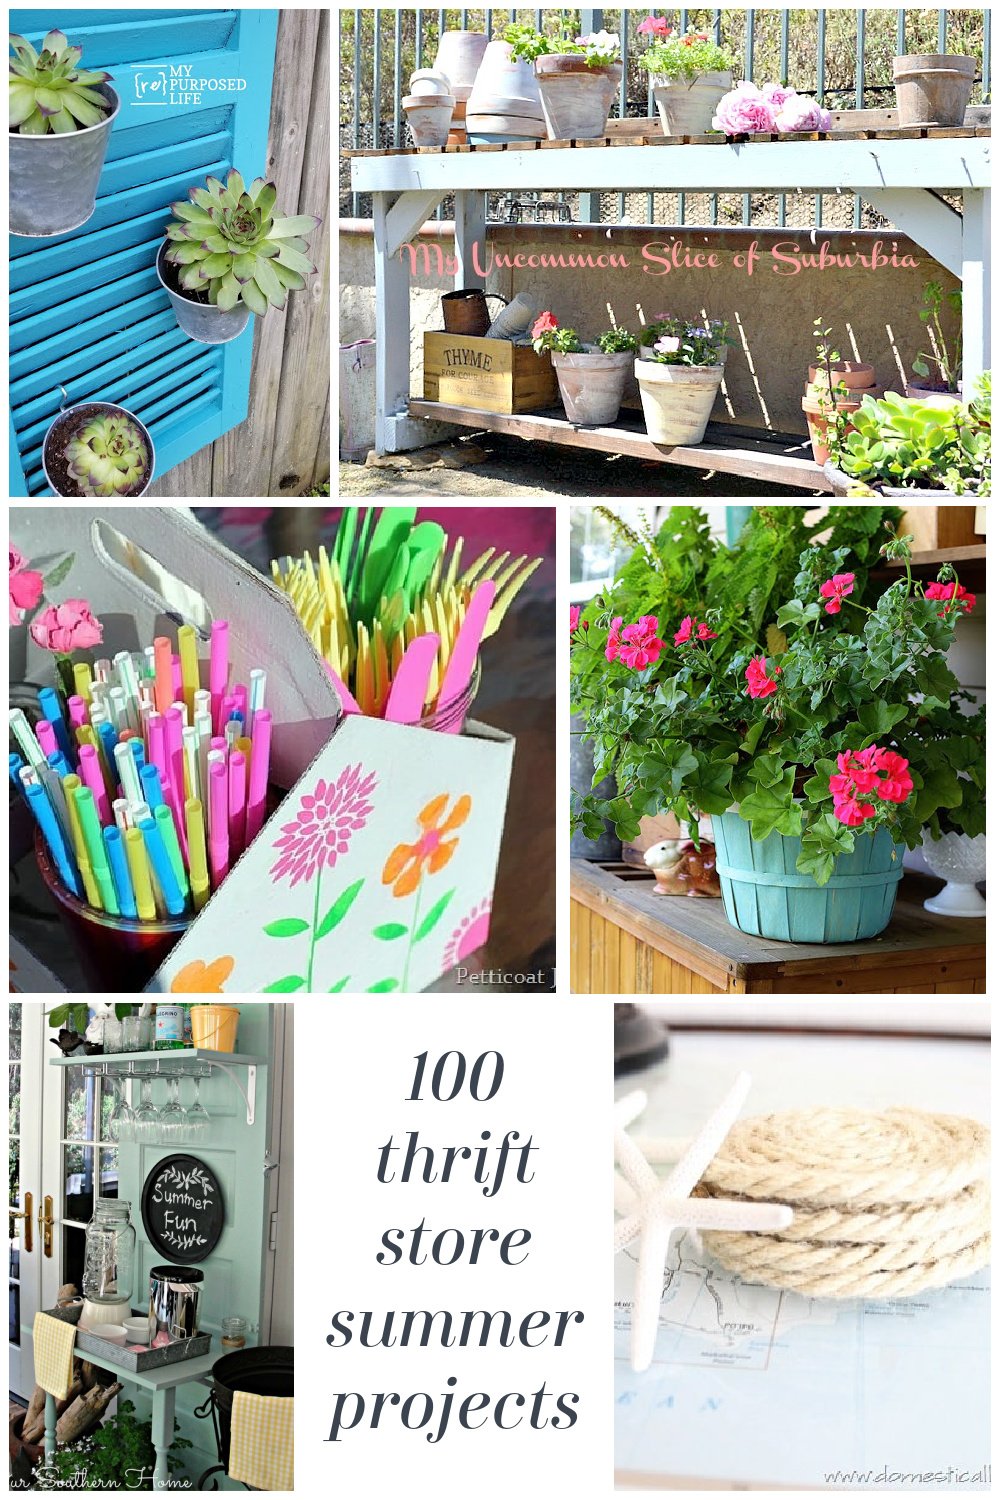 Over 100 thrift store Summer projects to inspire you to get outdoors and do it yourself. Upcycle, repurpose, & simple makeovers. So many ideas, so little time! #MyRepurposedLife #summer #diy #projects #thriftstore via @repurposedlife